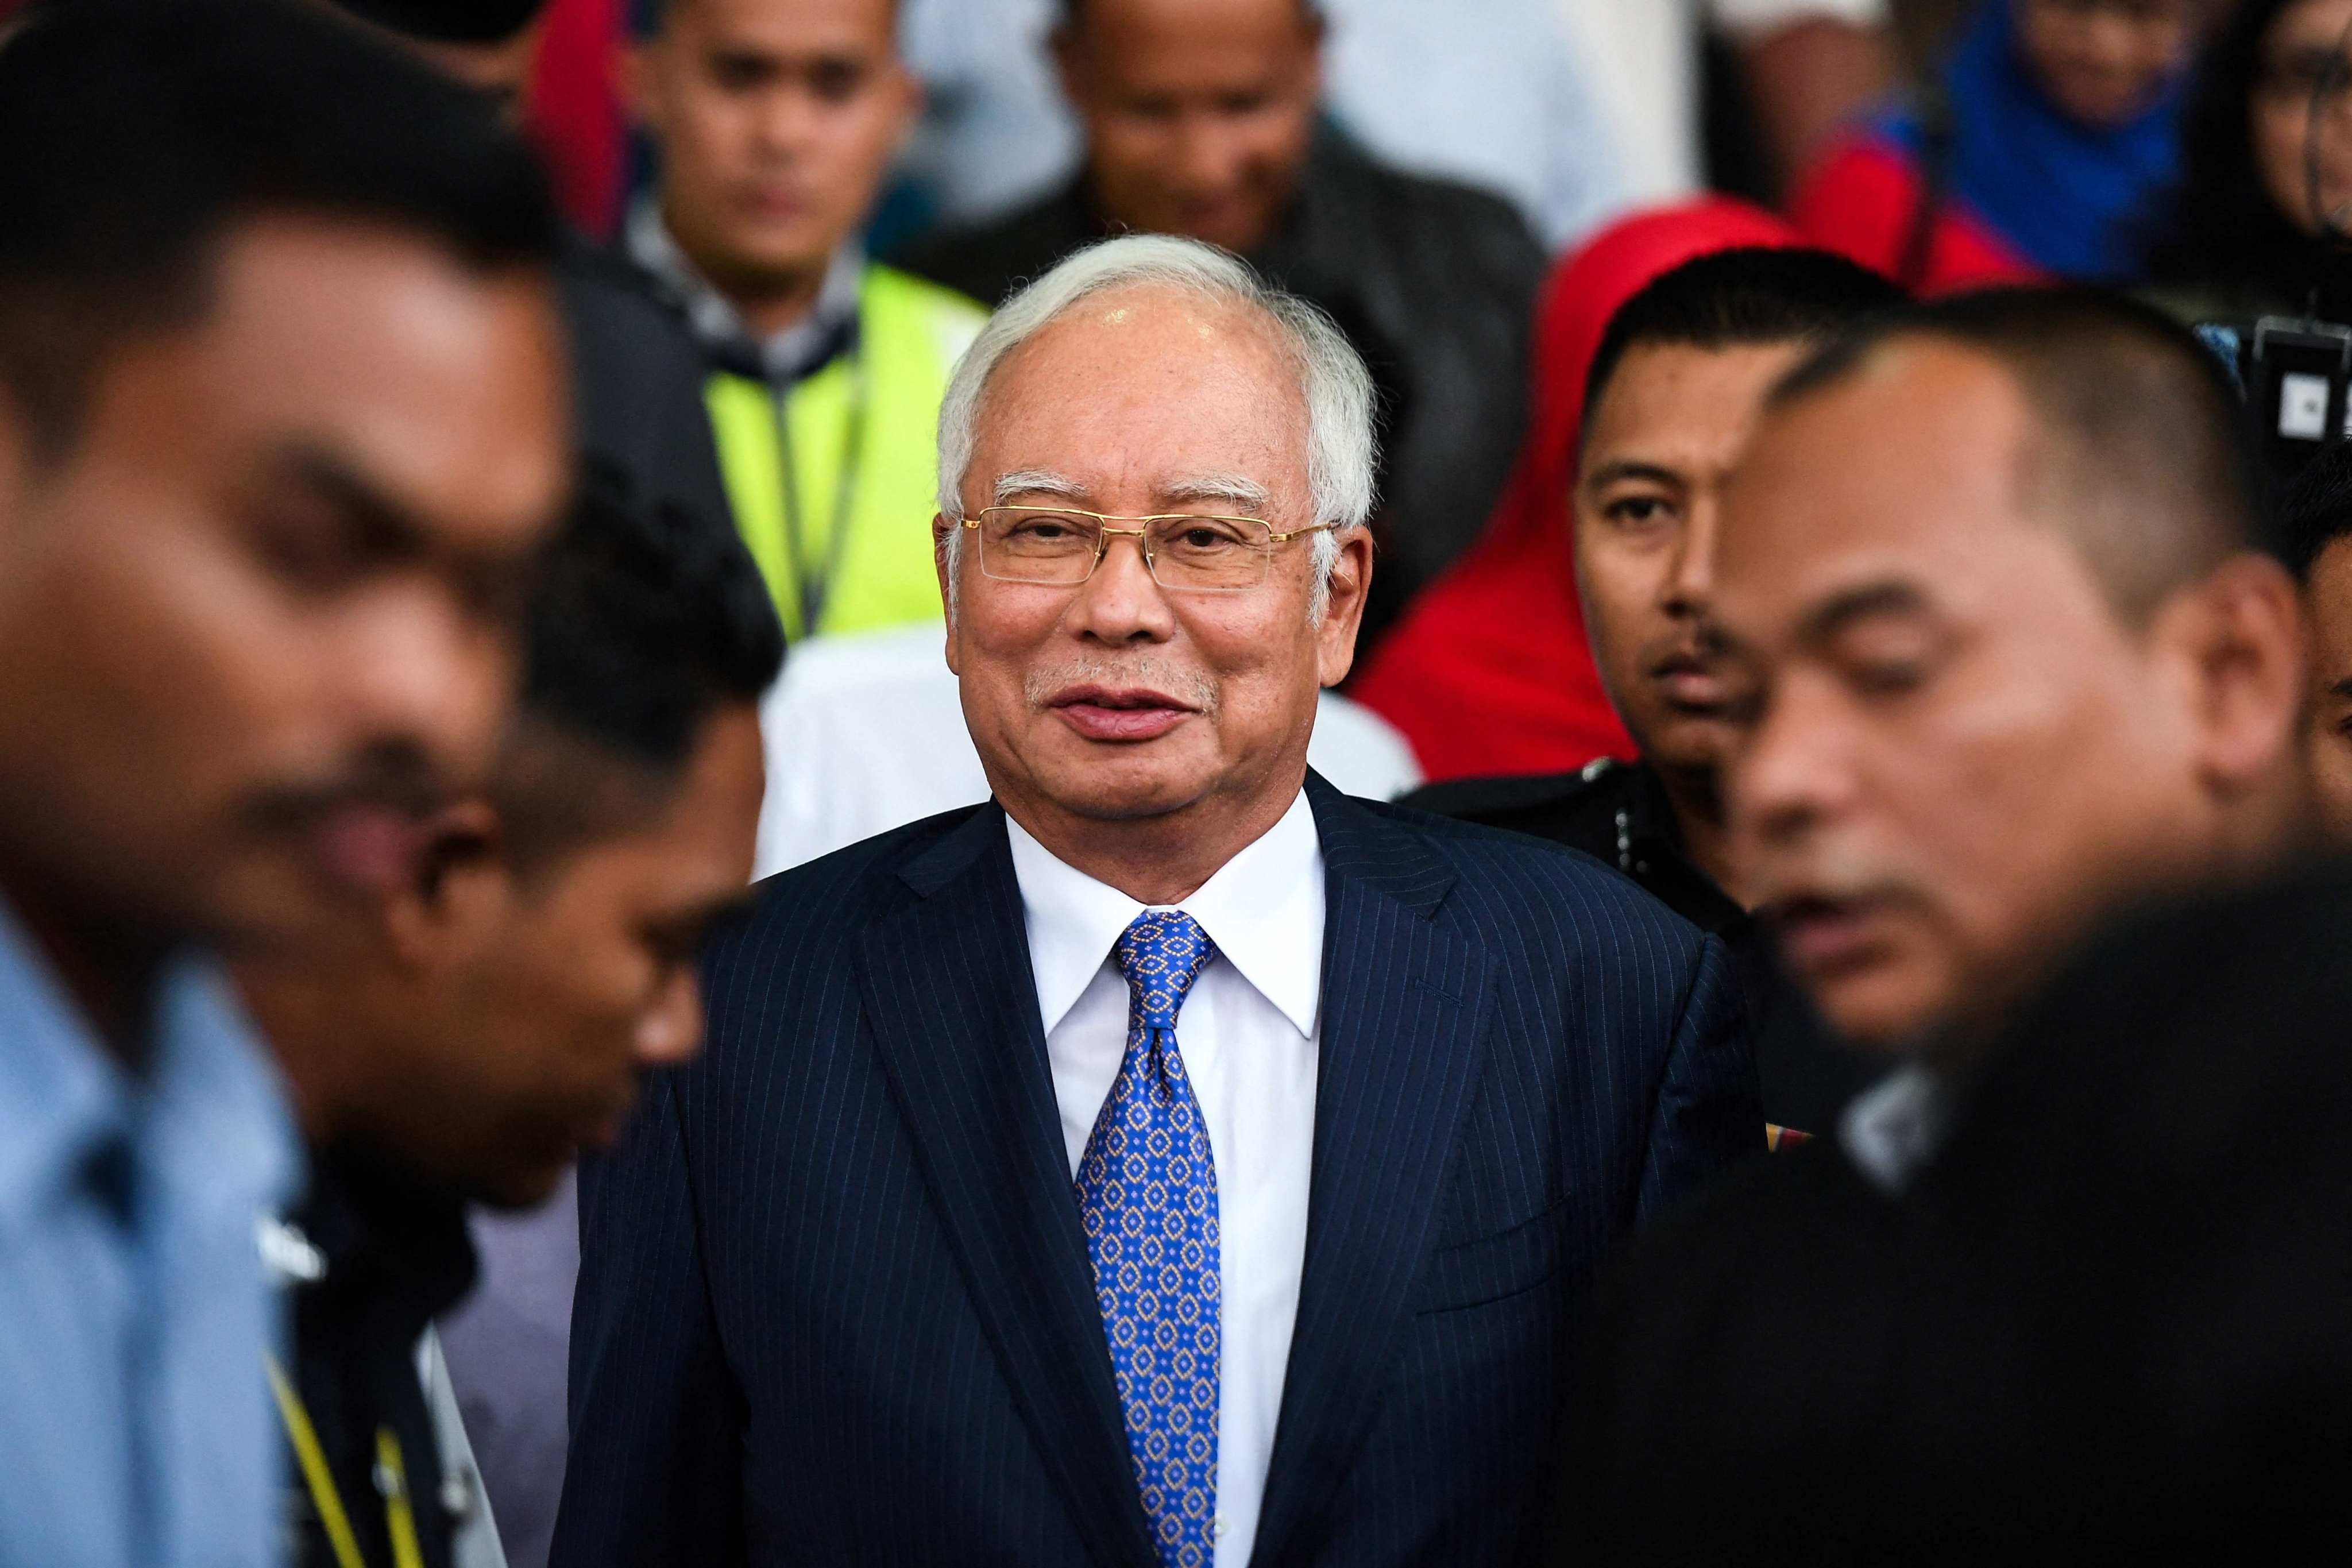 Malaysia’s former prime minister Najib Razak leaves a court in Kuala Lumpur. Najib was convicted in 2020 of seven counts of corruption and abuse of power involving 42 million ringgit (US$8.9 million). Photo: AFP